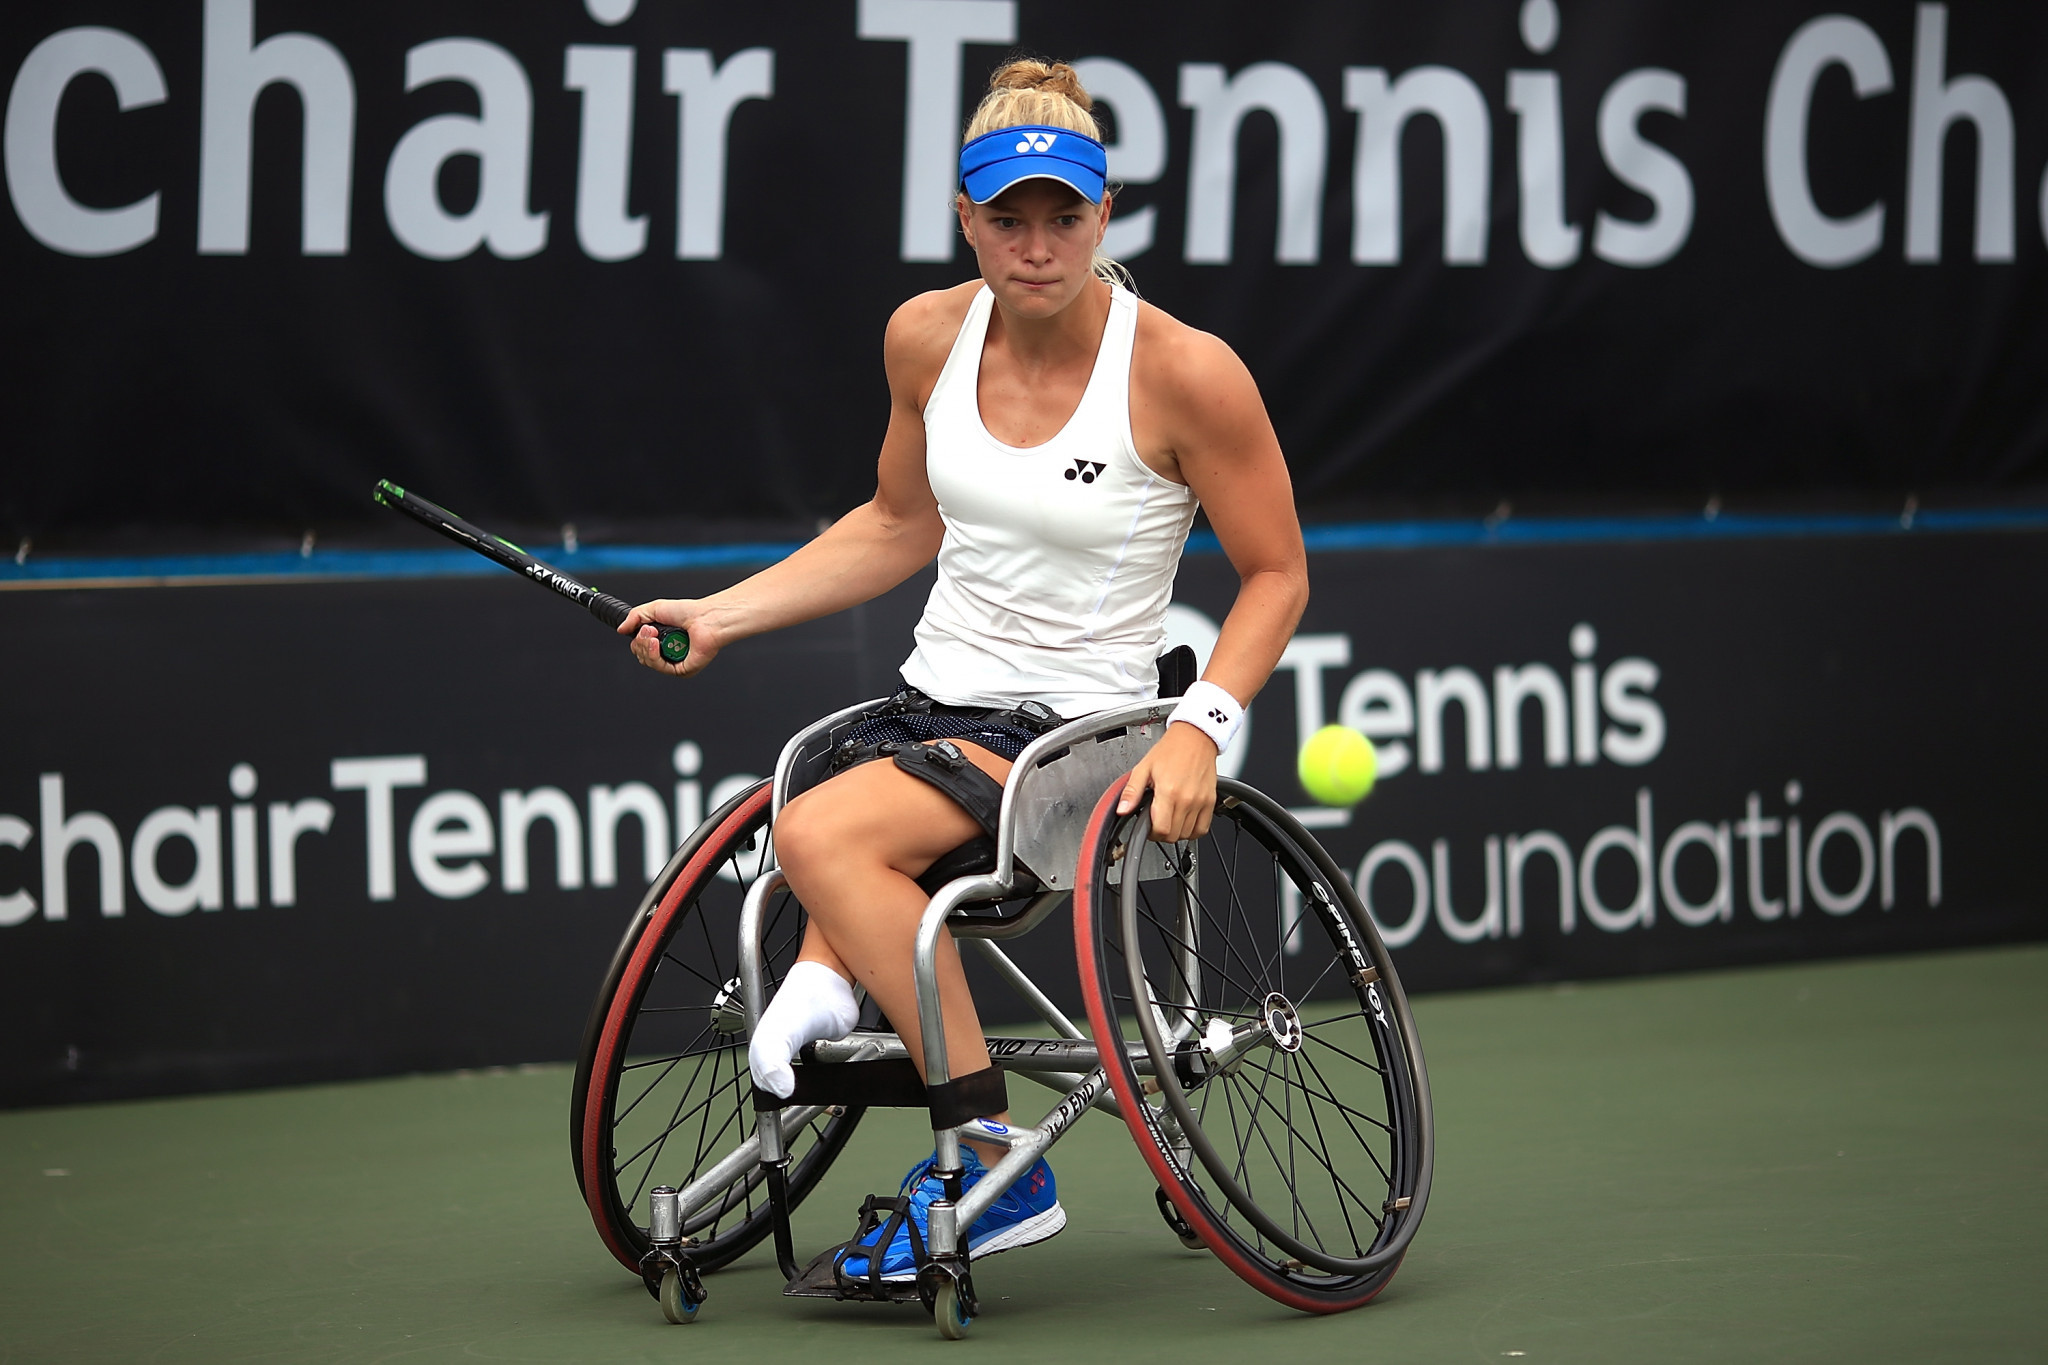 Dutch player Diede de Groot secured the women's singles title ©Getty Images